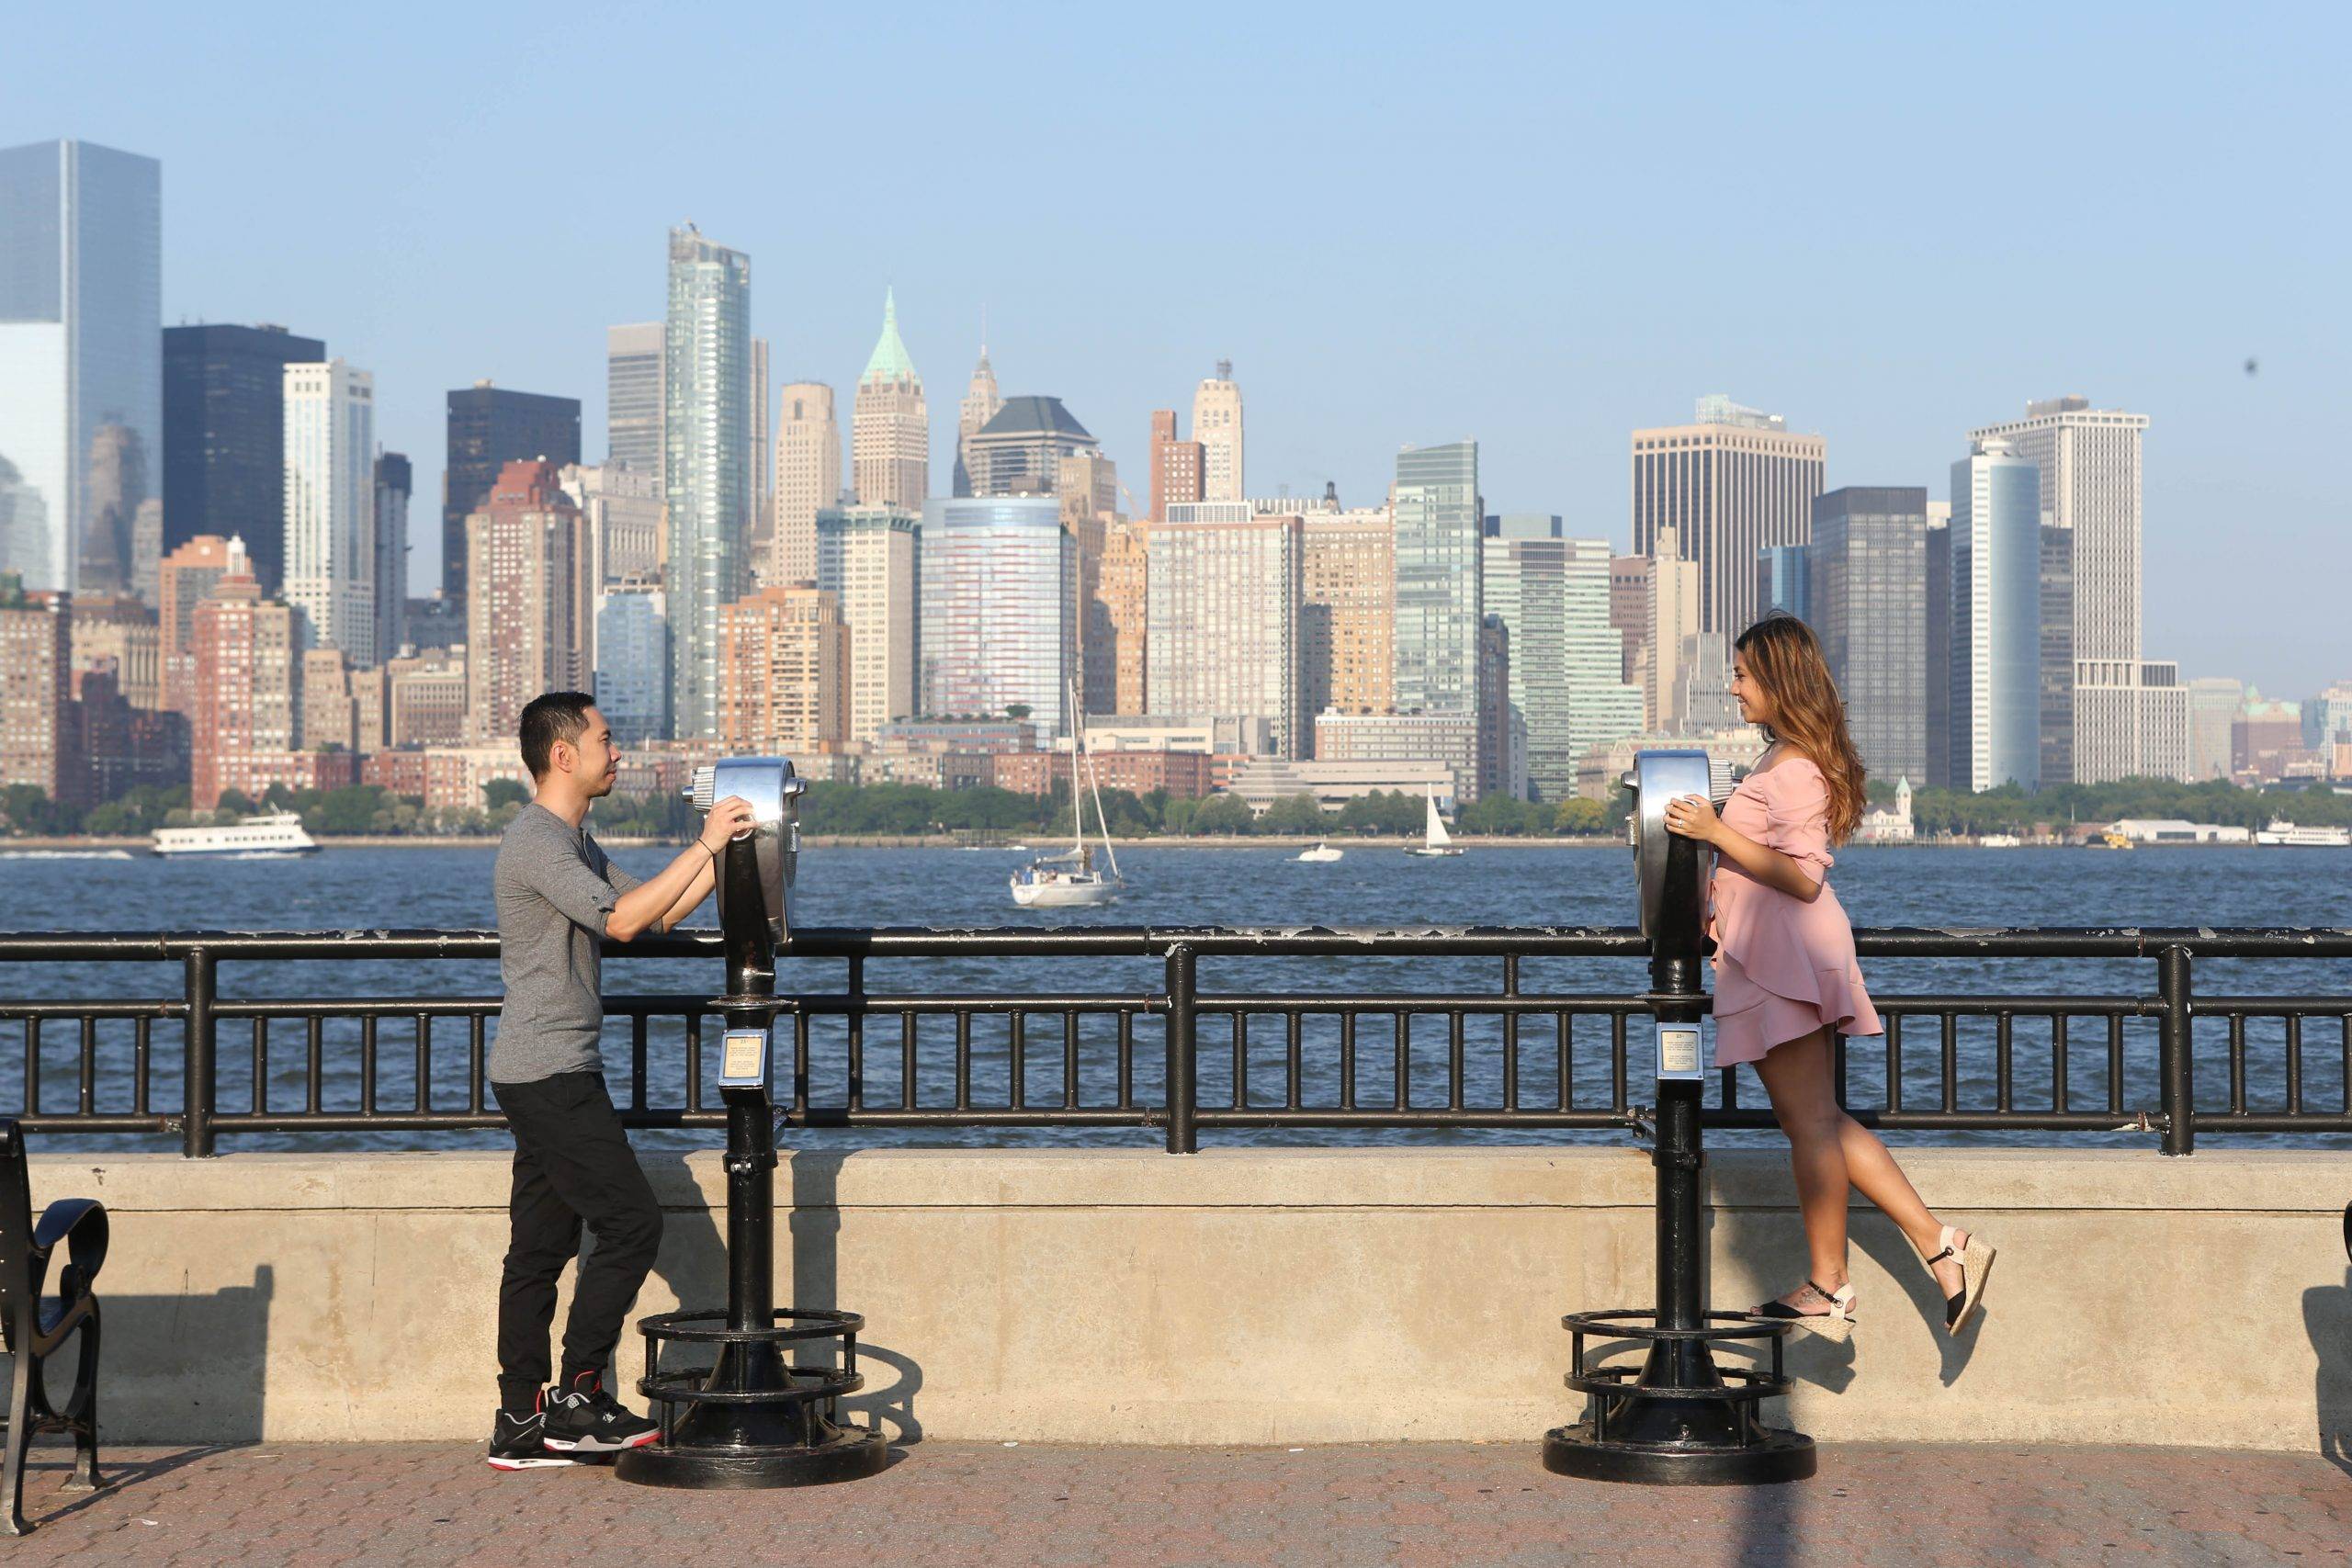 Two people standing on a bench in front of a city skyline.